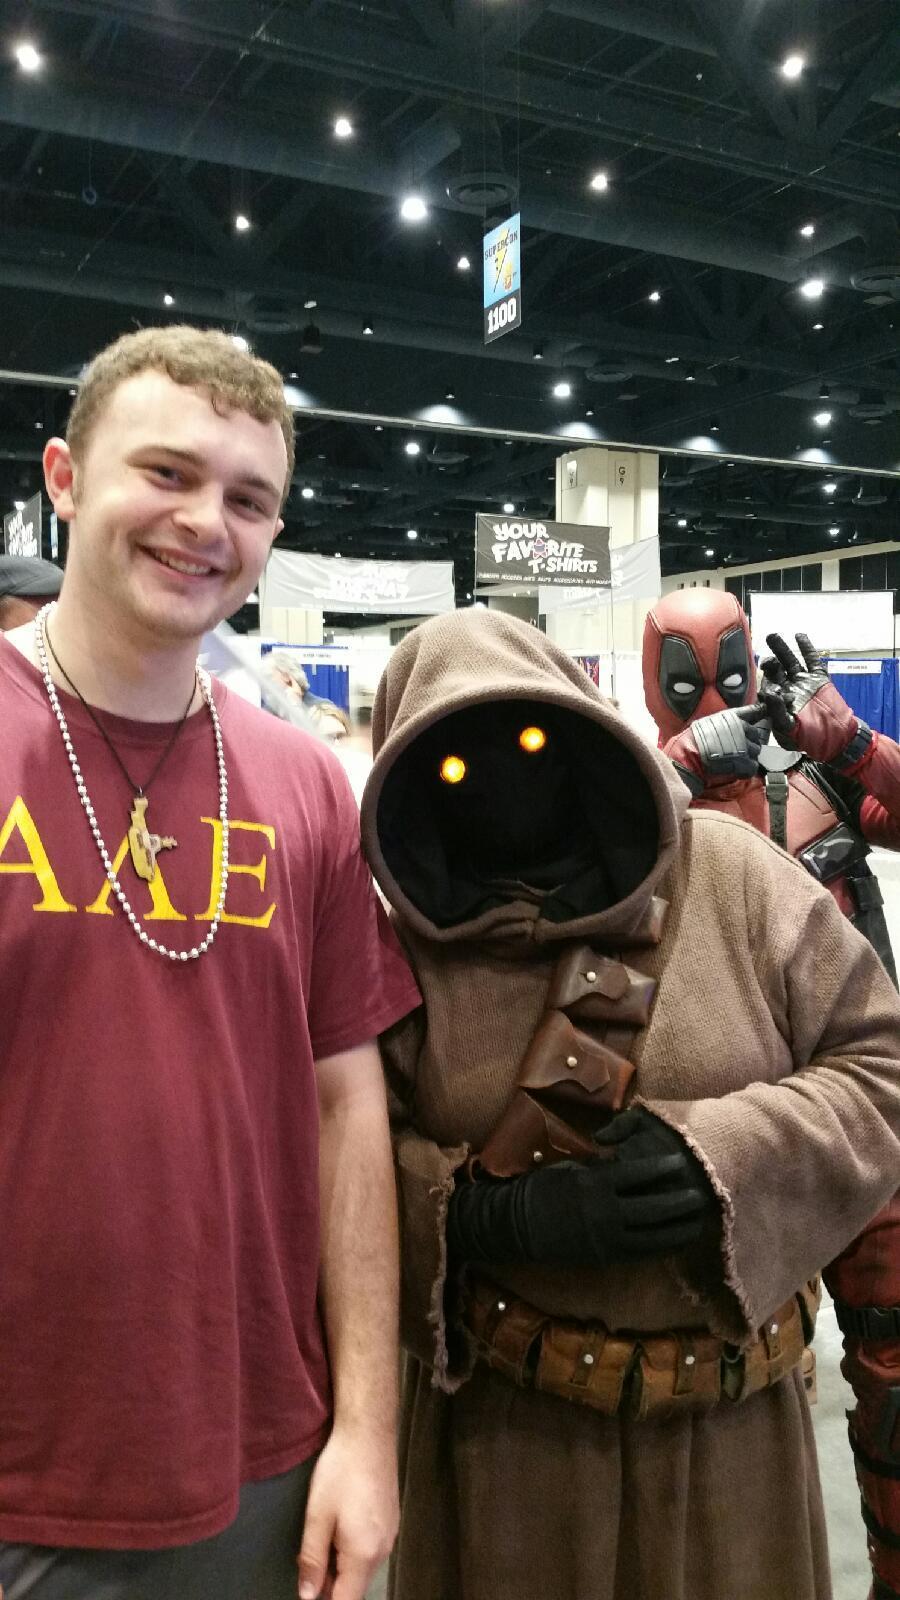 failnation:
“At supercon I was taking a picture with a Jawa.. didn’t realize the deadpool till I got home
”